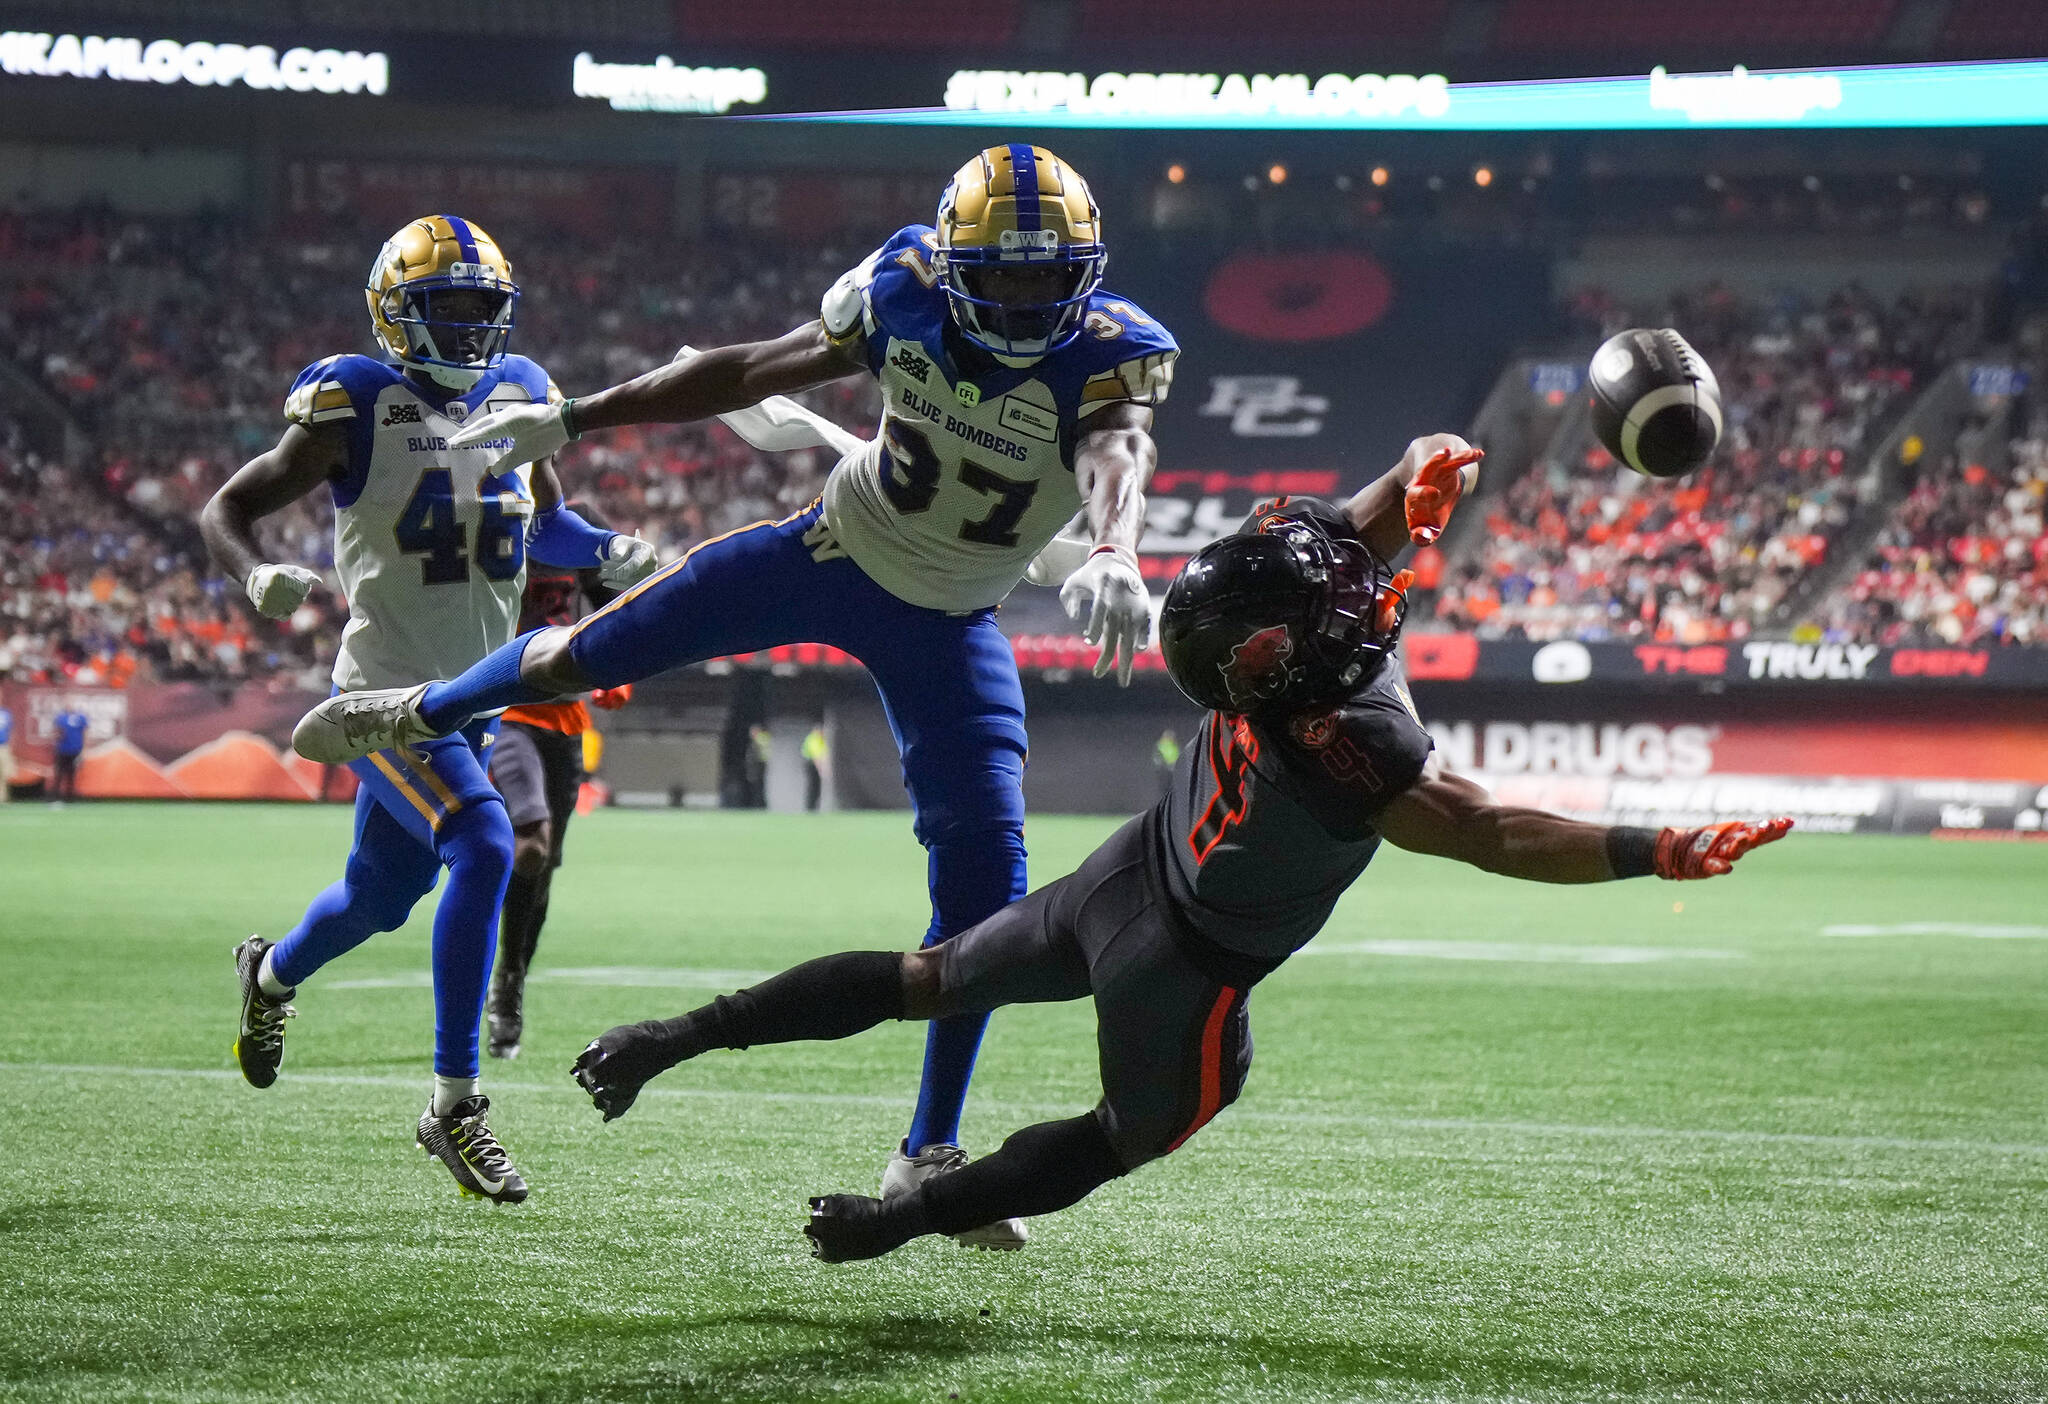 B.C. Lions’ Keon Hatcher (4) fails to make the reception in the end zone as Winnipeg Blue Bombers’ Brandon Alexander (37) defends and Desmond Lawrence (46) watches during the first half of CFL football game in Vancouver, on Saturday, October 15, 2022. THE CANADIAN PRESS/Darryl Dyck